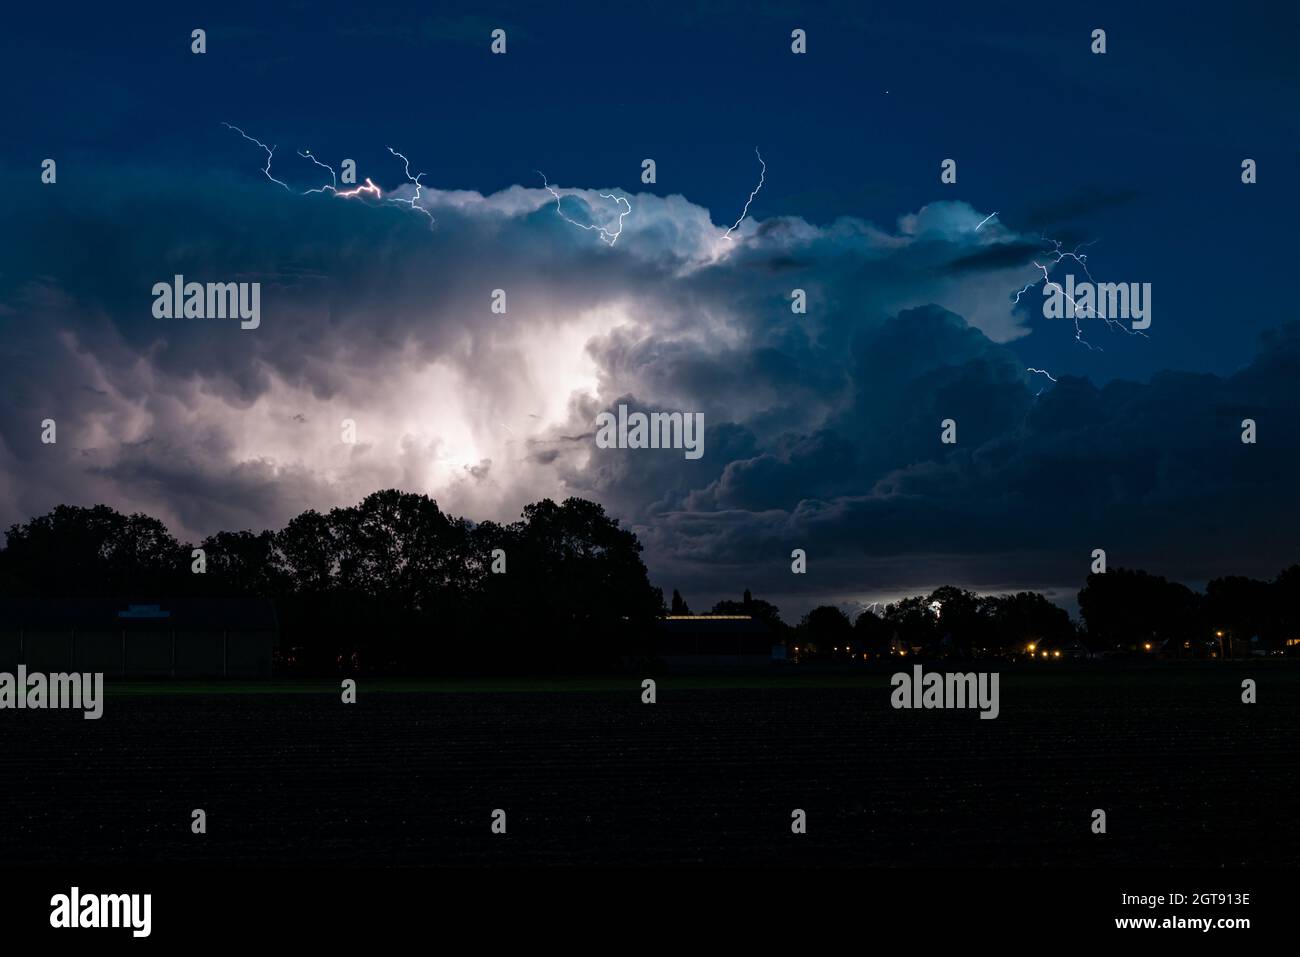 Upward Lightning from a Cumulonimbus thundercloud. From the anvil of a thunderstorm, lightning bolts shoot upwards into the stratosphere. Stock Photo